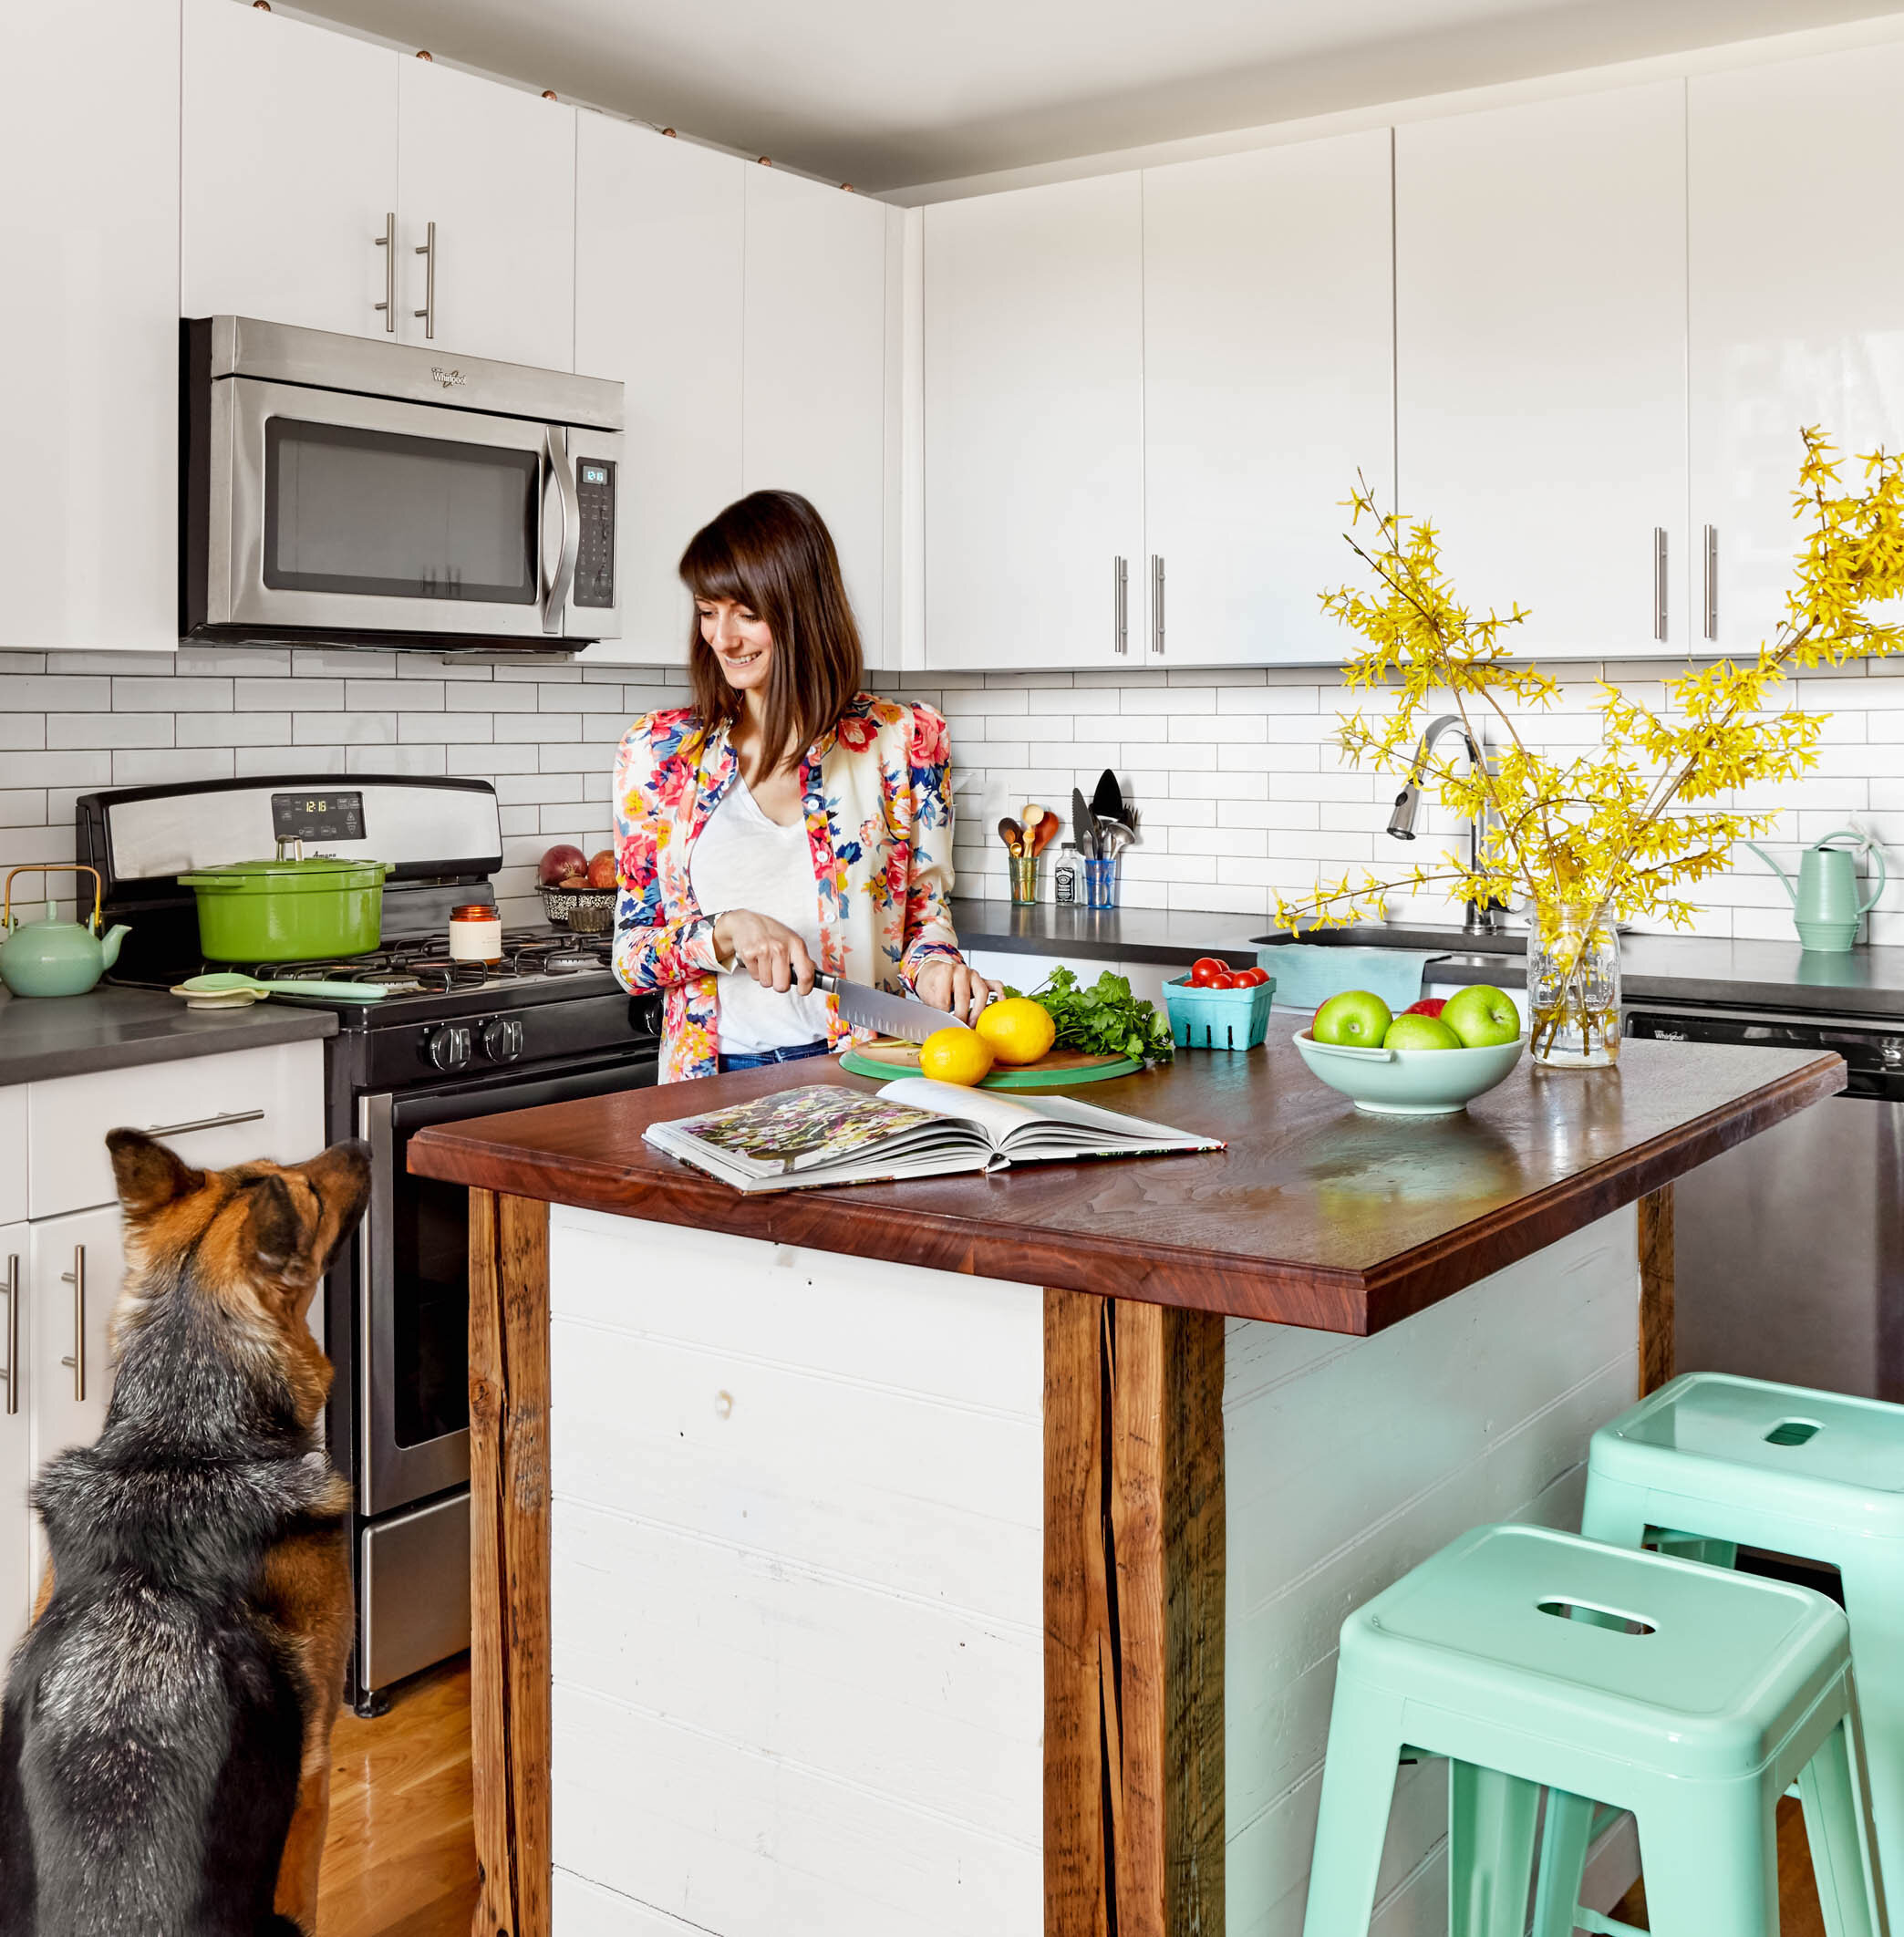 woman-cooking-in-kitchen-with-dog-1.jpg